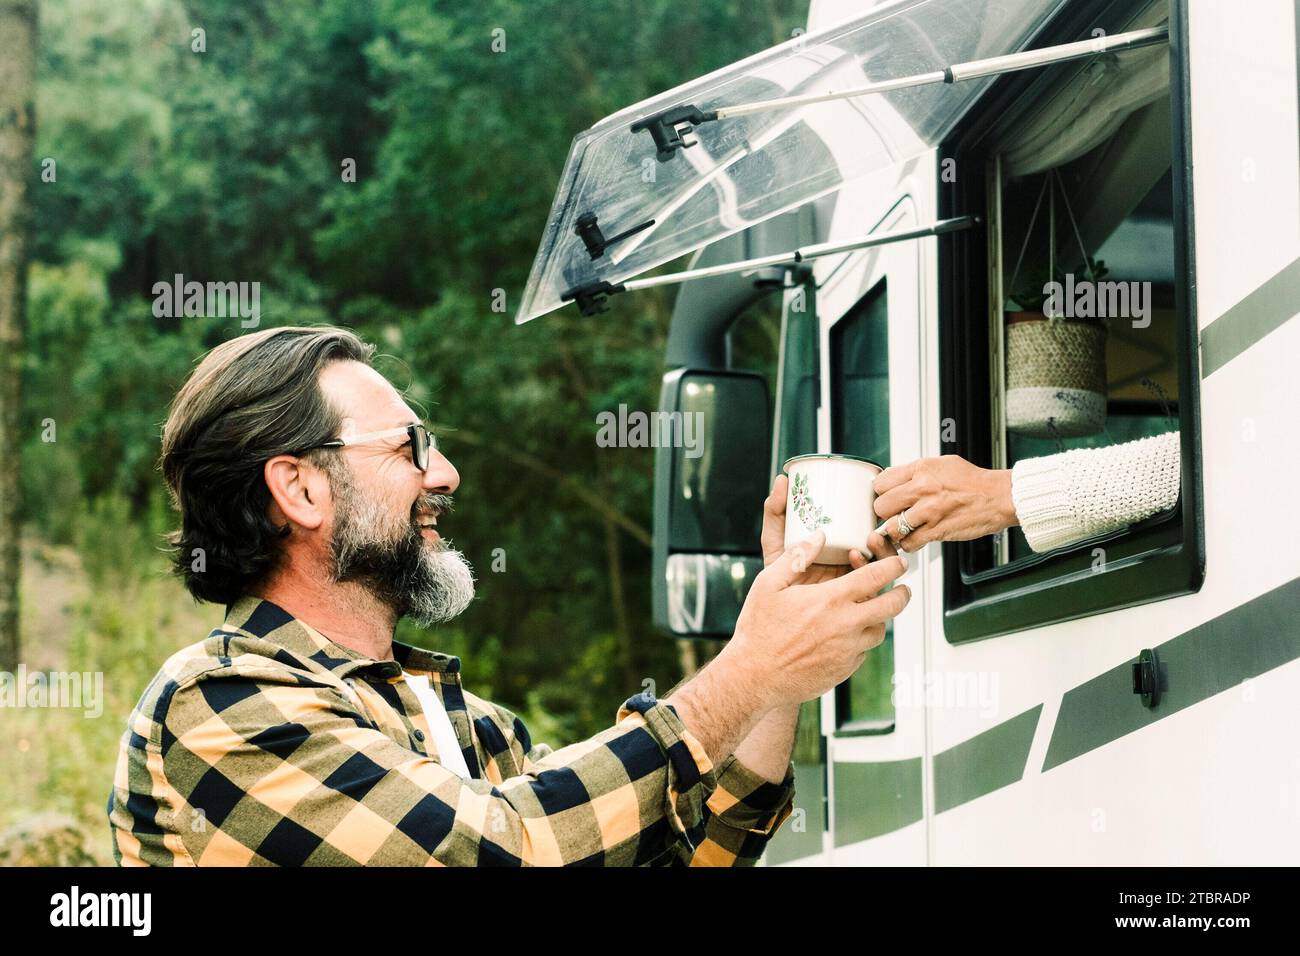 Man and woman enjoying camper van vanlife alternative lifestyle and vacation. People with motorhome alternative house and vehicle rent for holiday. Traveler and nomadic life. Concept of freedom nature Stock Photo